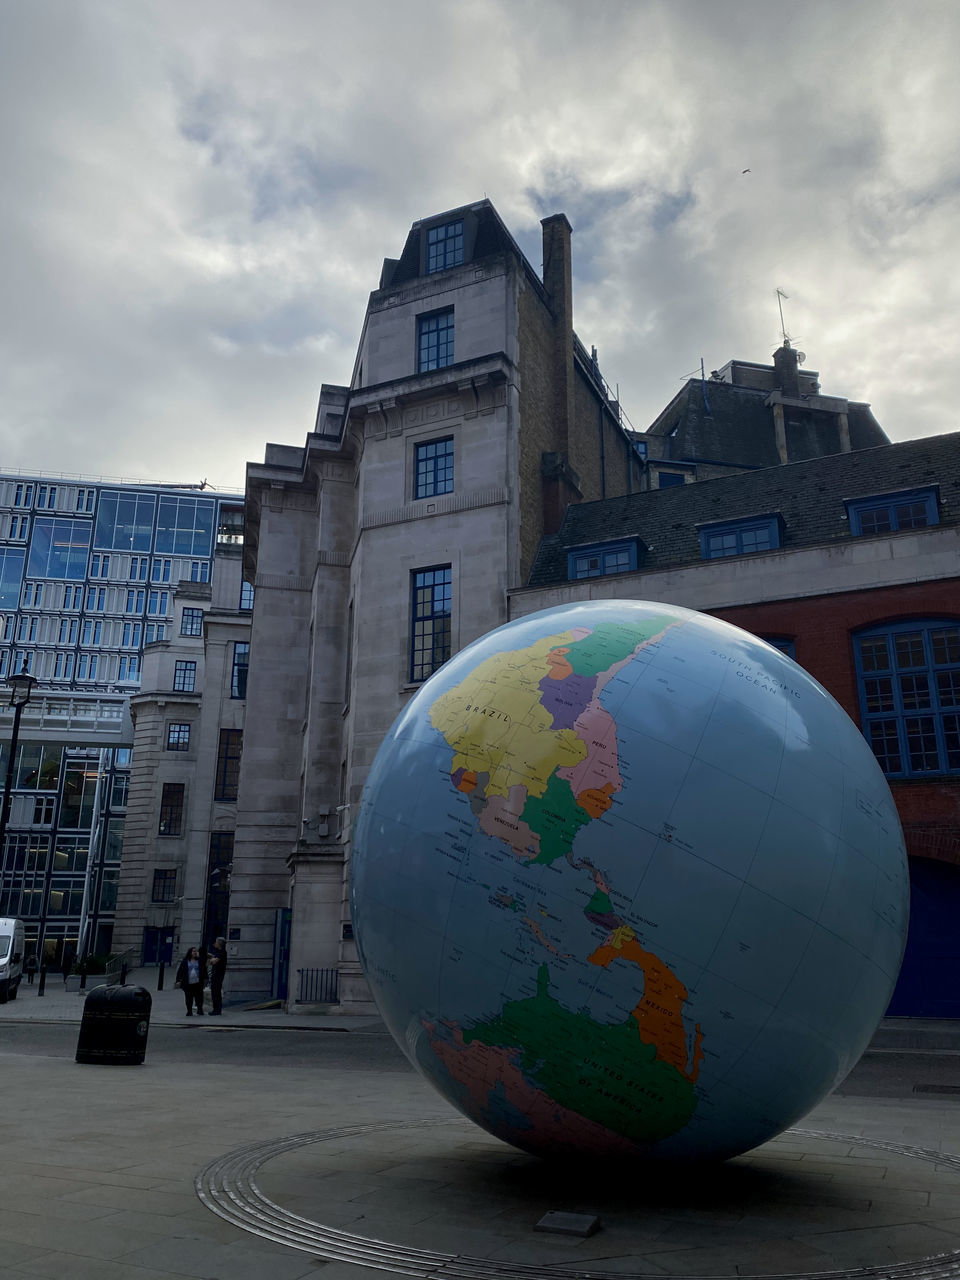 architecture, building exterior, globe - man made object, city, built structure, cloud, sky, nature, building, sphere, urban area, blue, planet earth, travel, travel destinations, planet, street, space, outdoors, no people, globe, map, world, business, environment, transportation